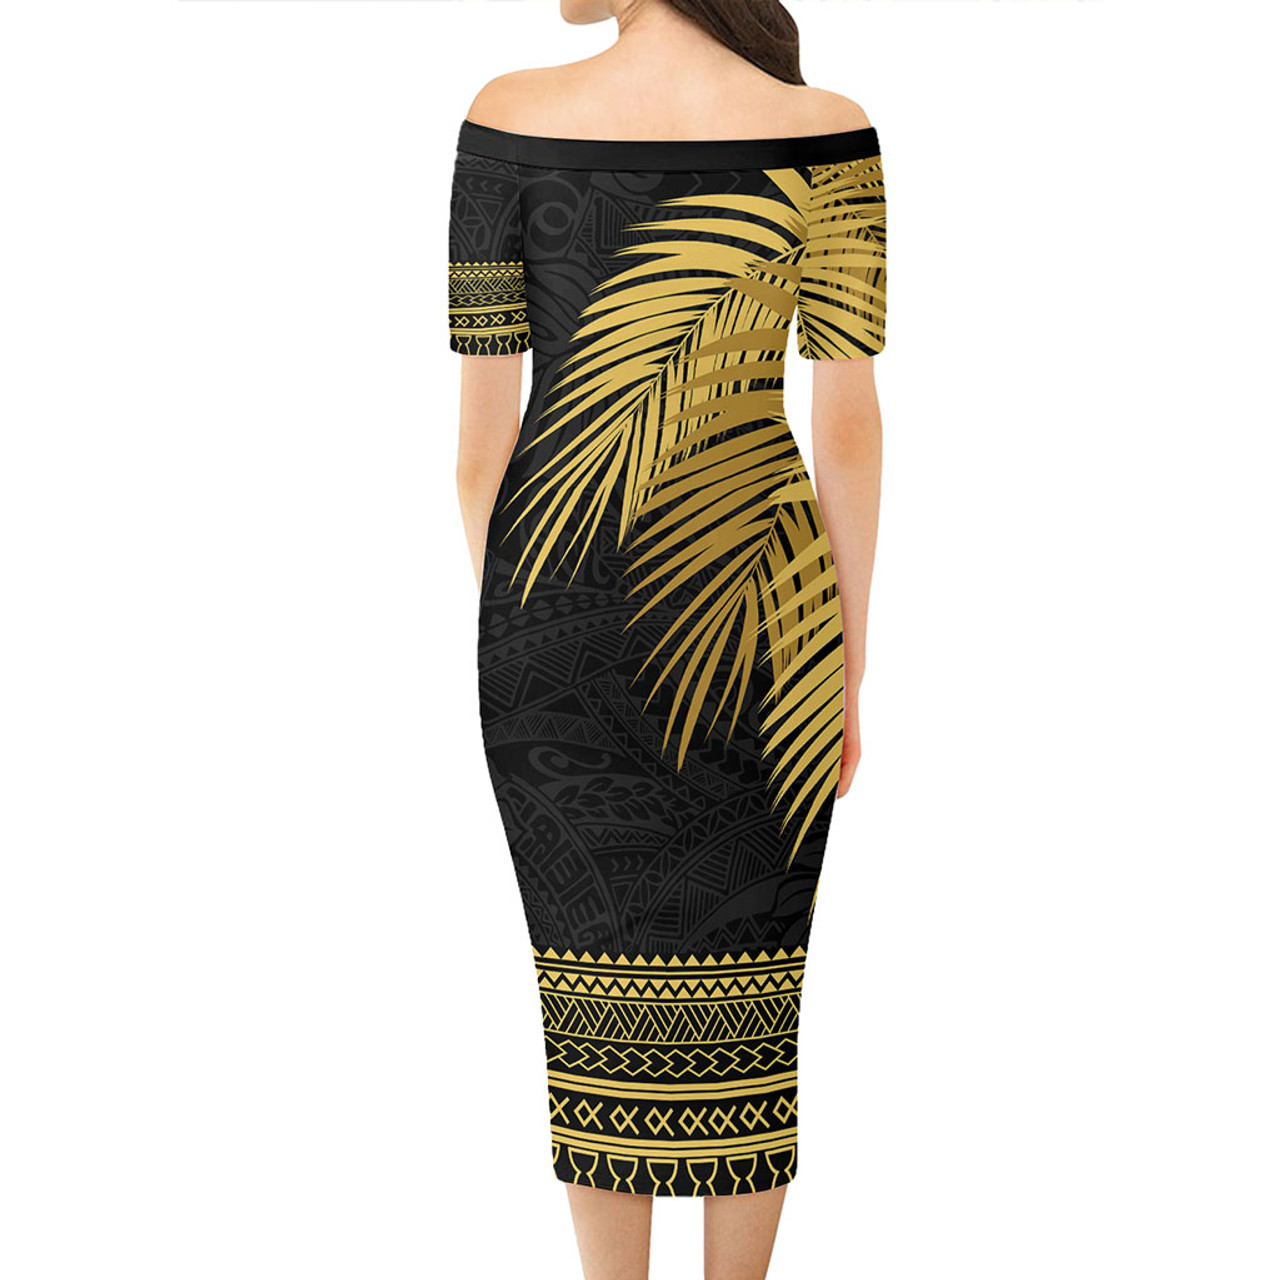 Guam Short Sleeve Off The Shoulder Lady Dress Polynesian Fabric Leaves Gold